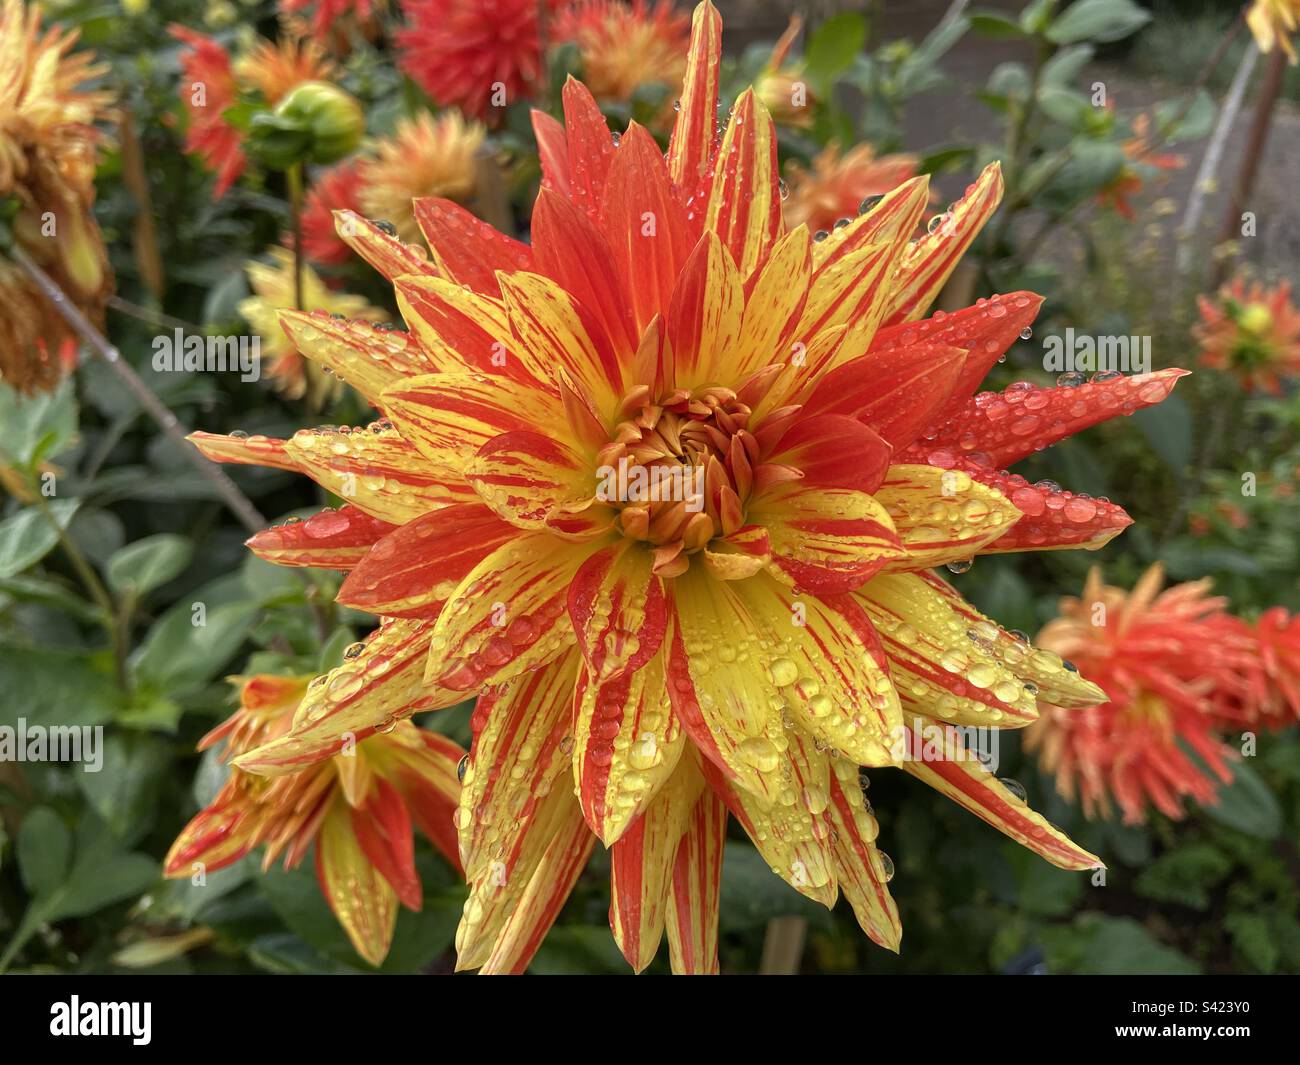 Vibrant yellow and orange dahlias in bloom after the rain Stock Photo